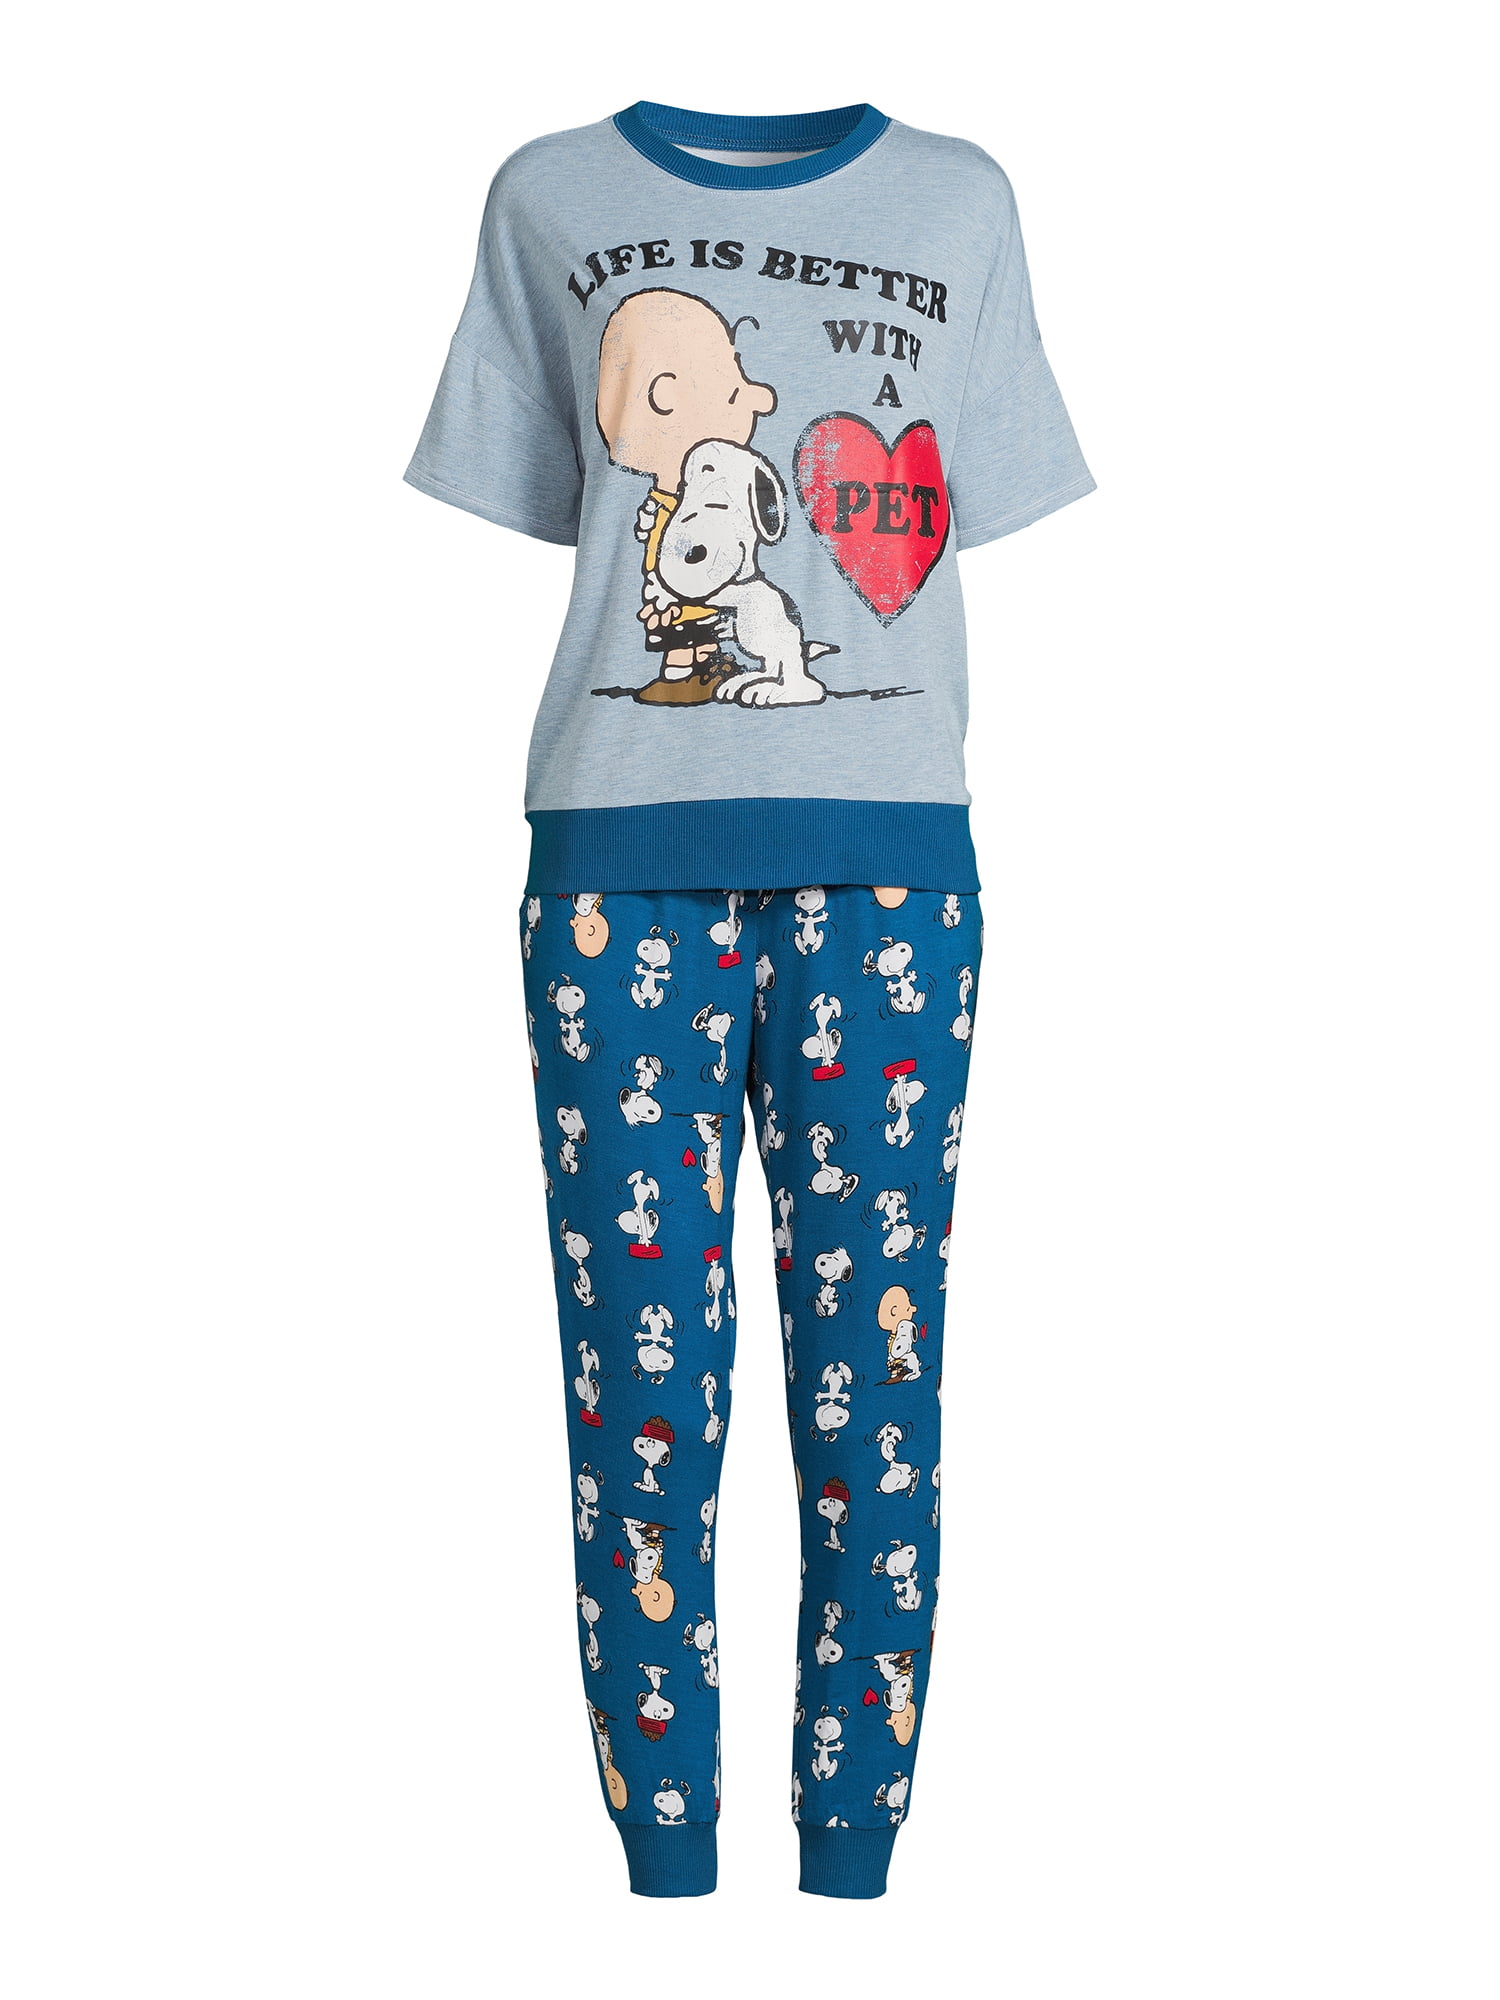 Snoopy Pajamas For Adults